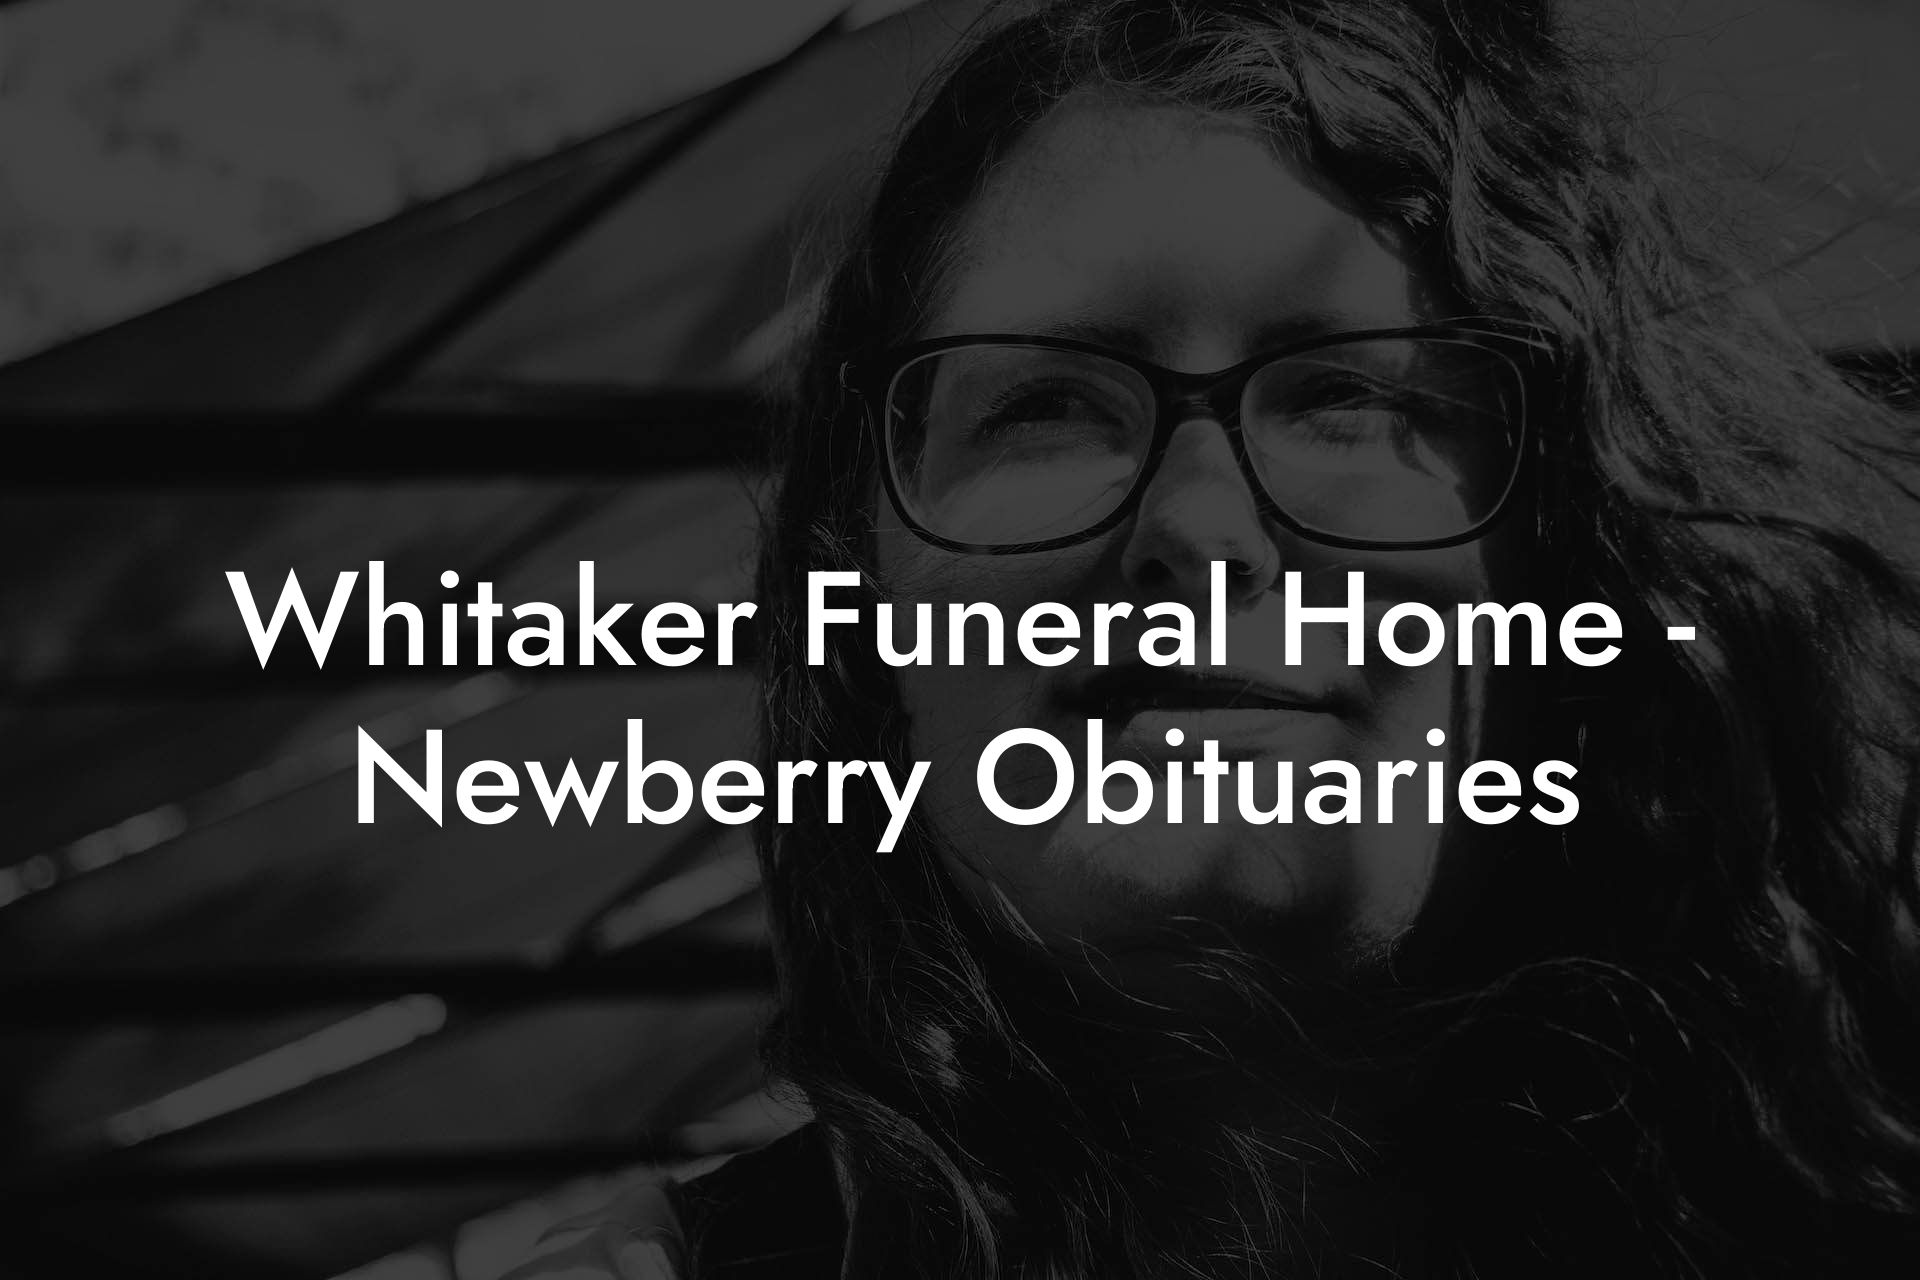 Whitaker Funeral Home - Newberry Obituaries